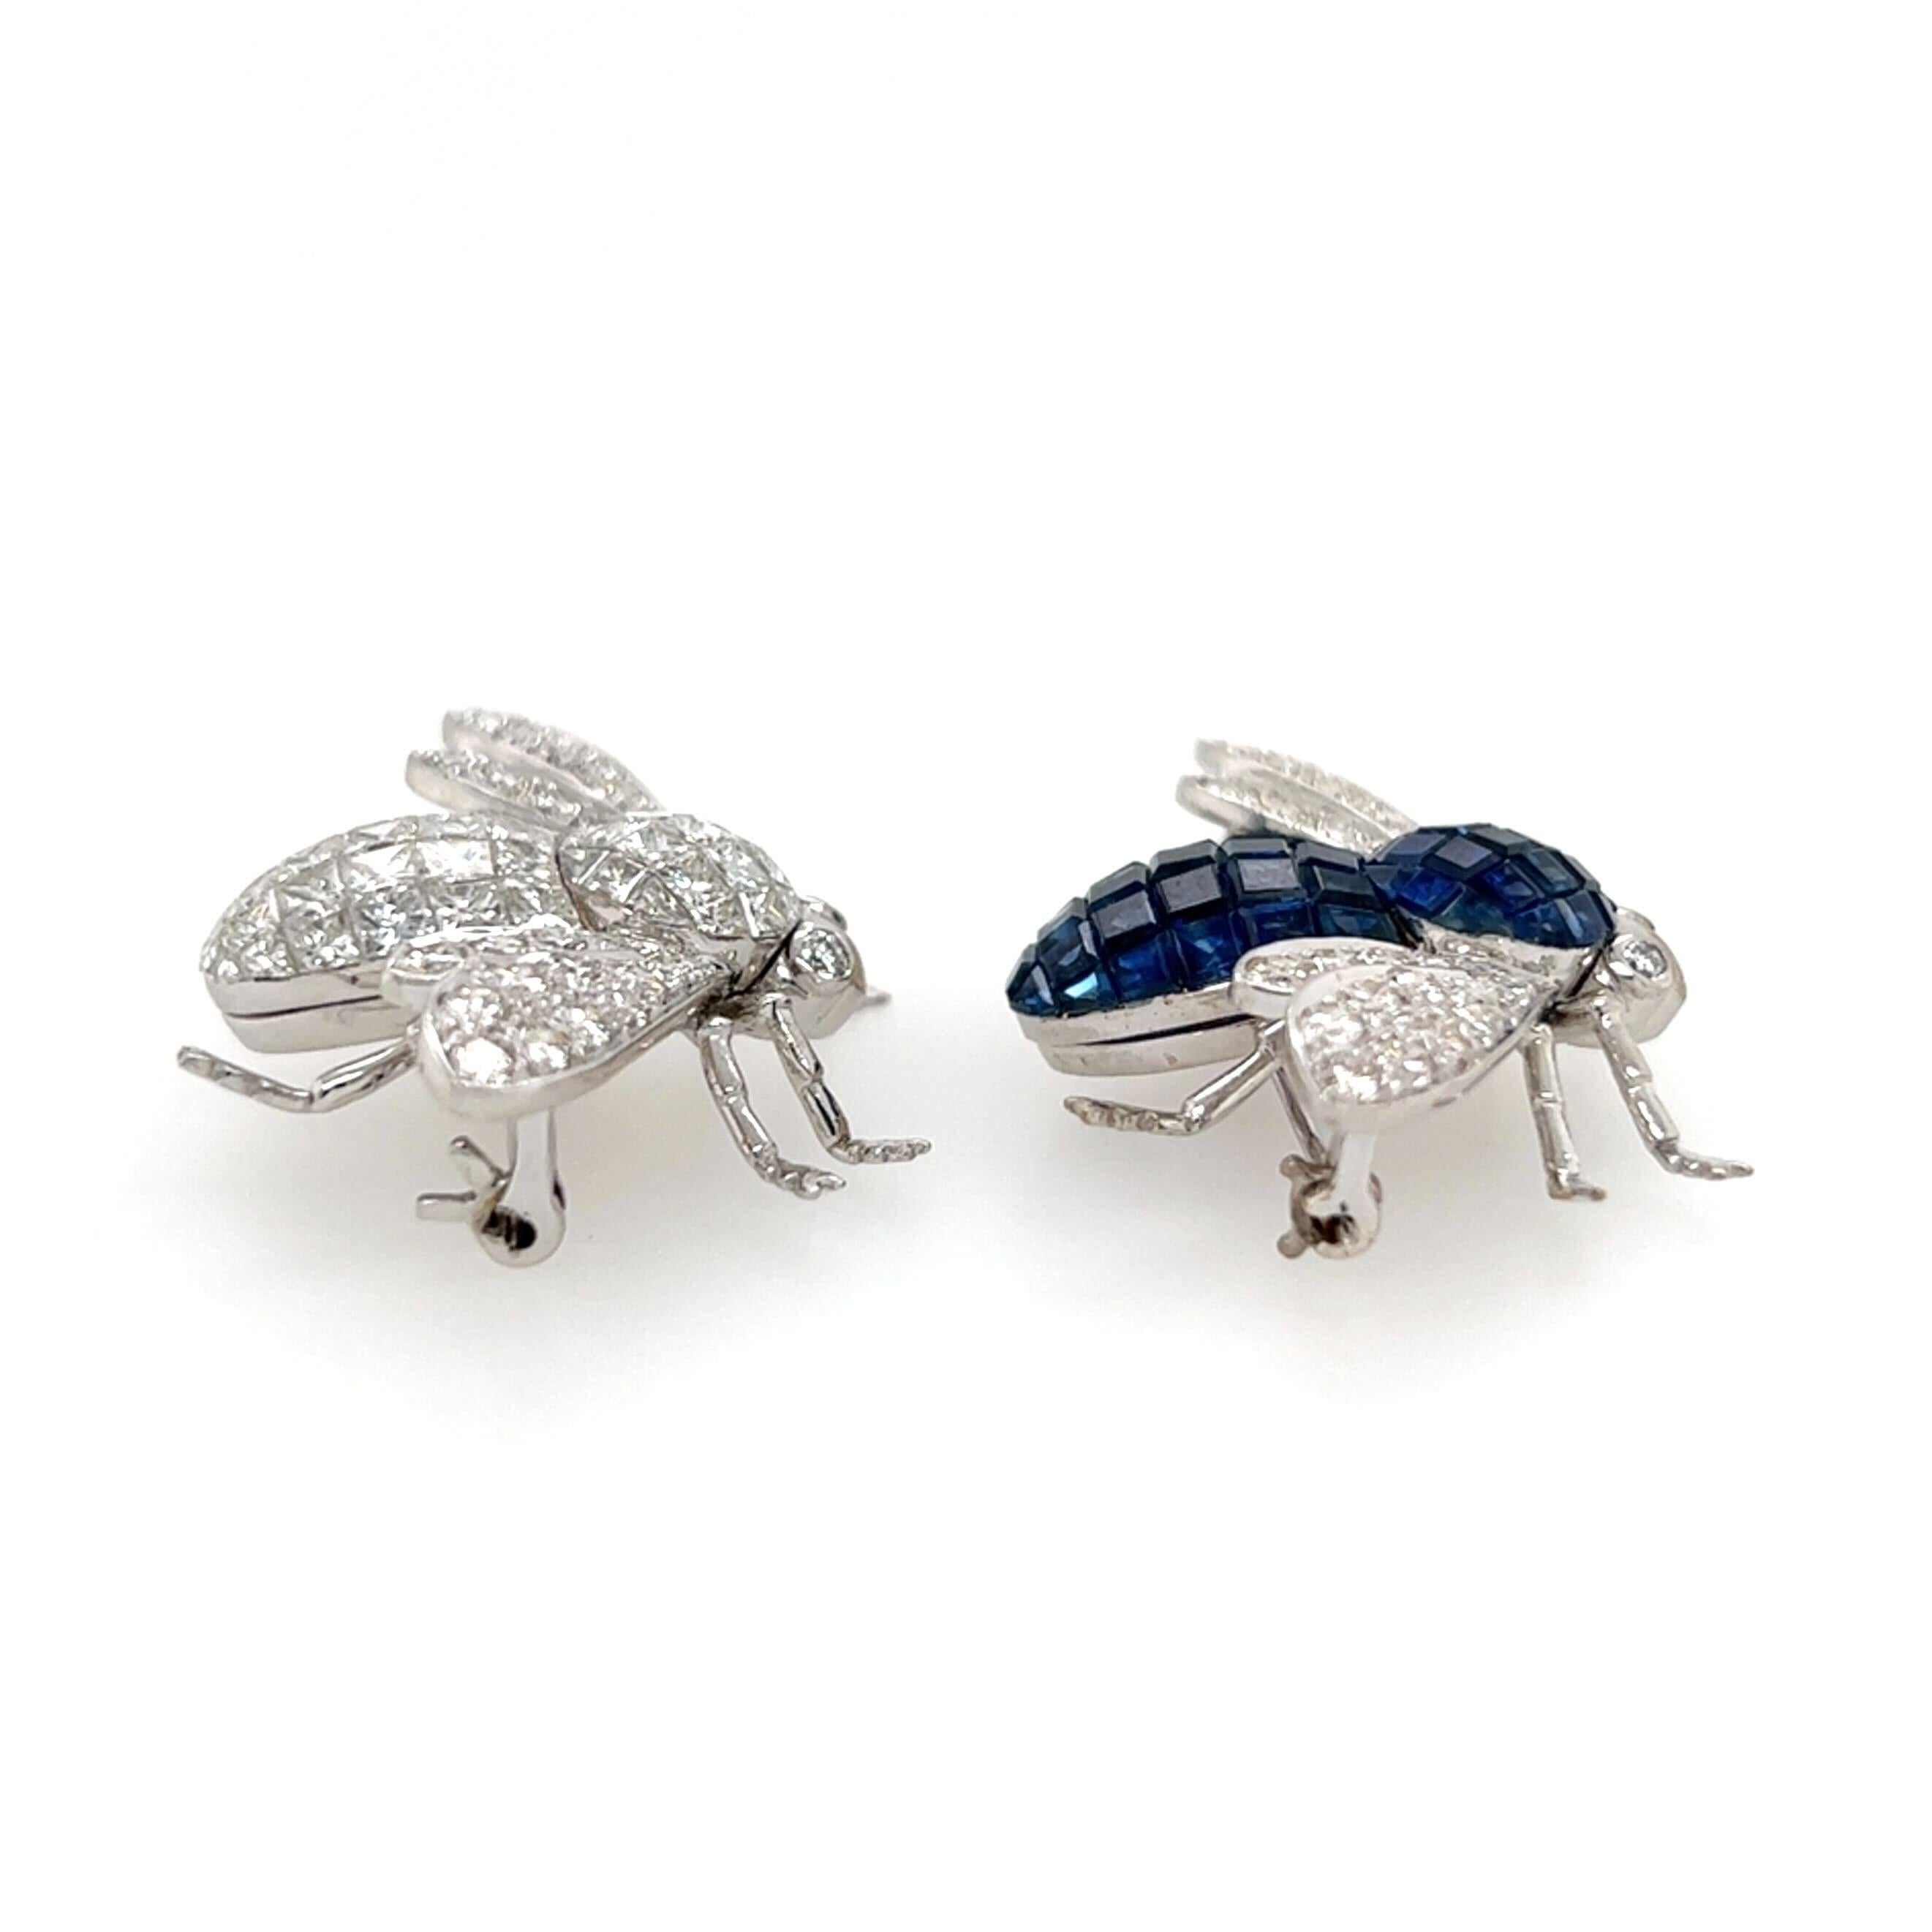 Brilliant Cut Pair of White Gold, Sapphire and Diamond Bee Brooches